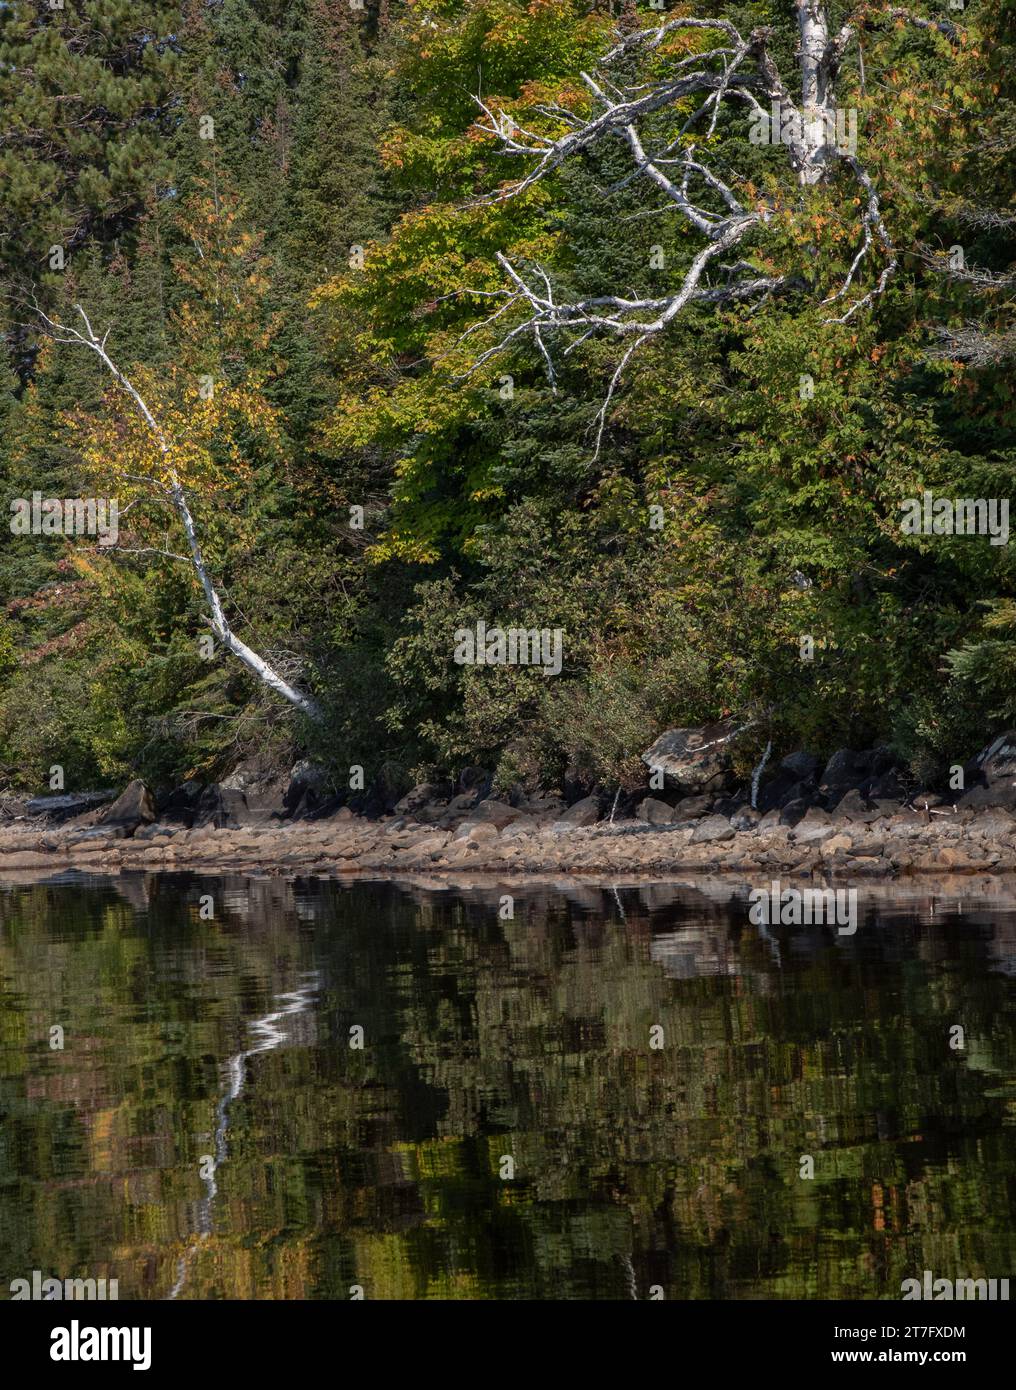 Reflections of trees in the lake in Algonquin Park Canada Stock Photo